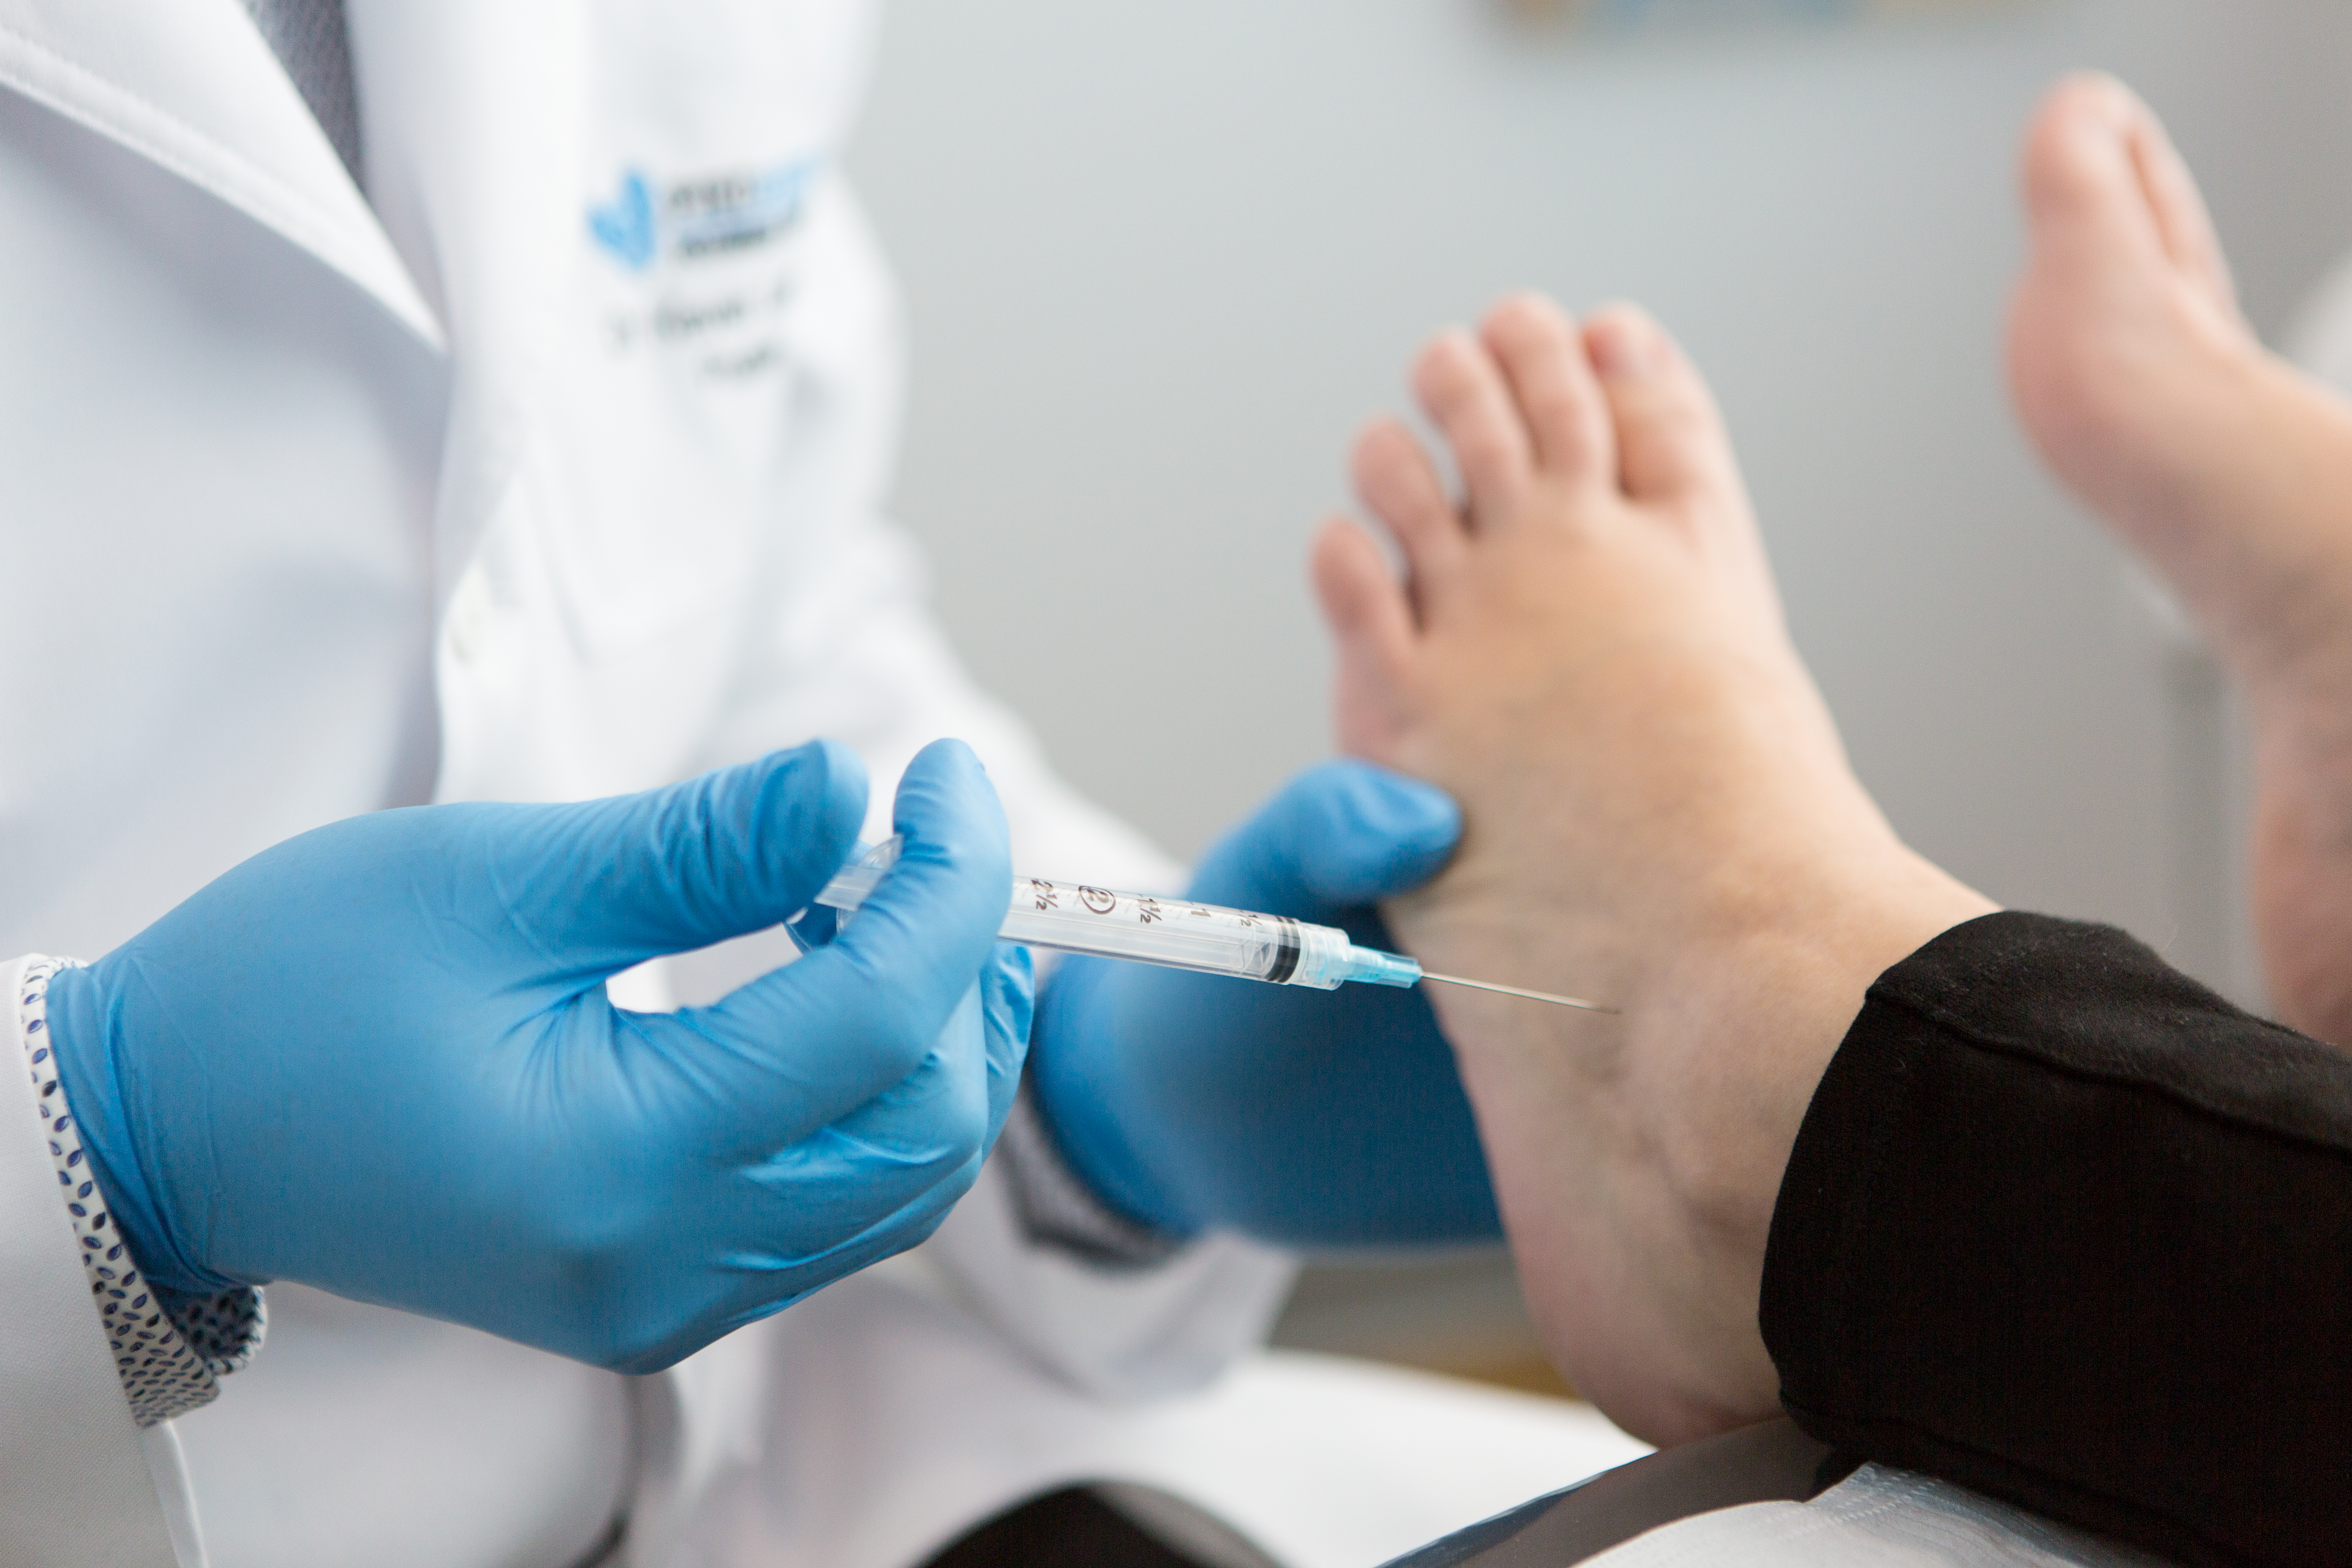 Cortisone injections in the foot